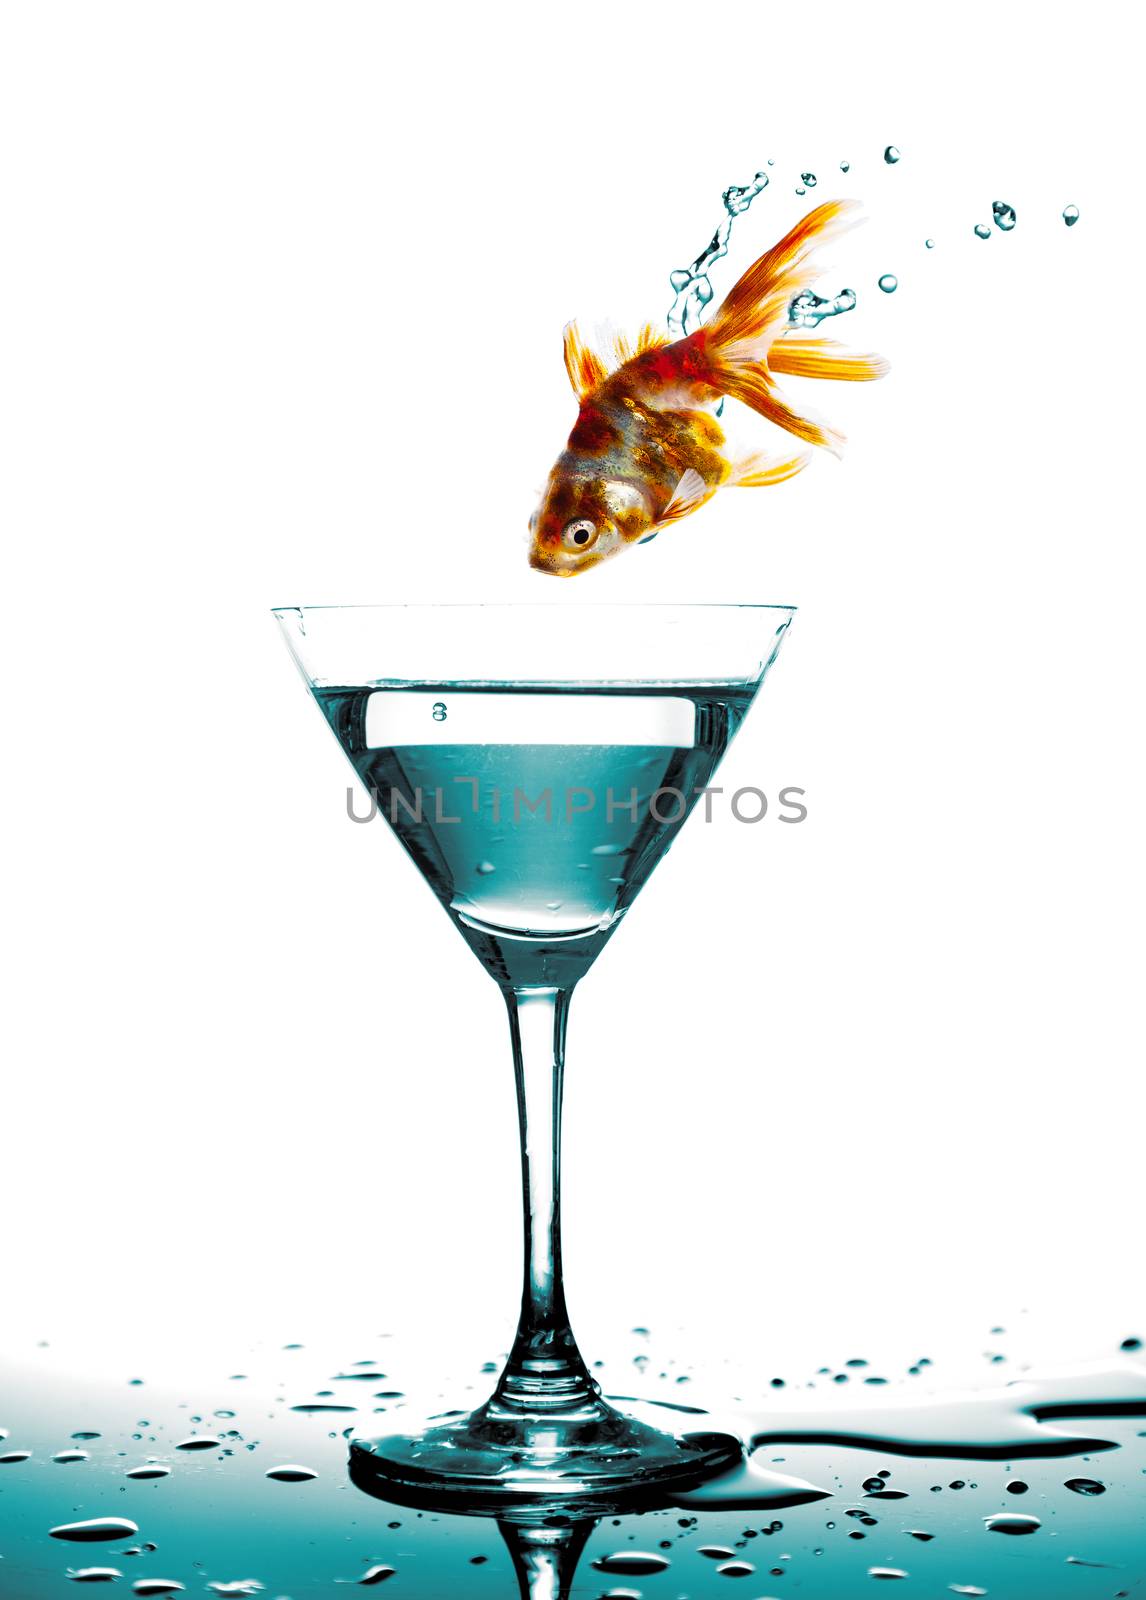 jump of Golden fish to martini glass, white background